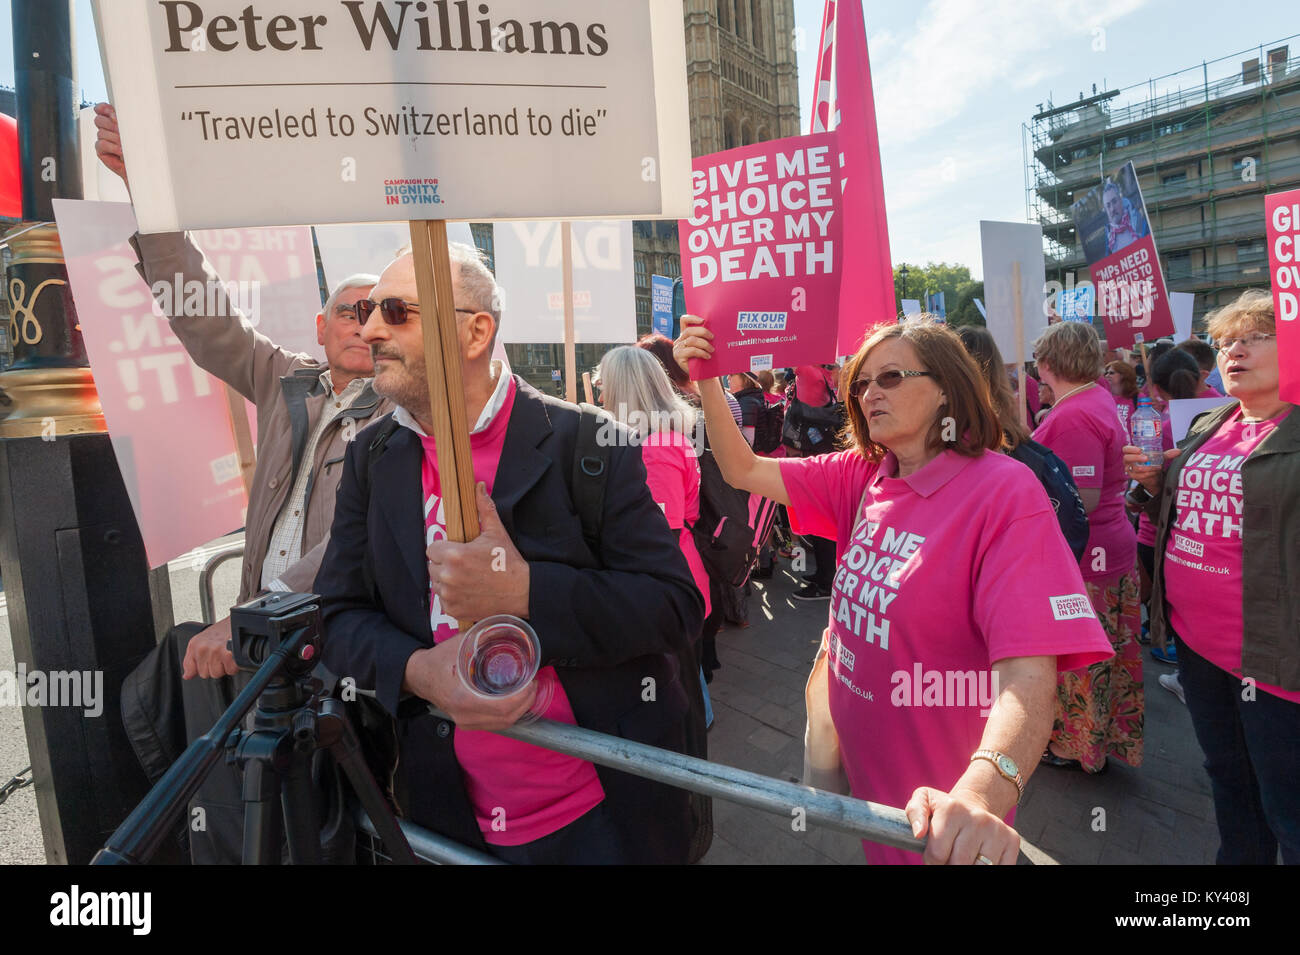 Supporter of the Assisted Suicide Bill being debated in Parliament  with t-shirts, placards and posters. Stock Photo